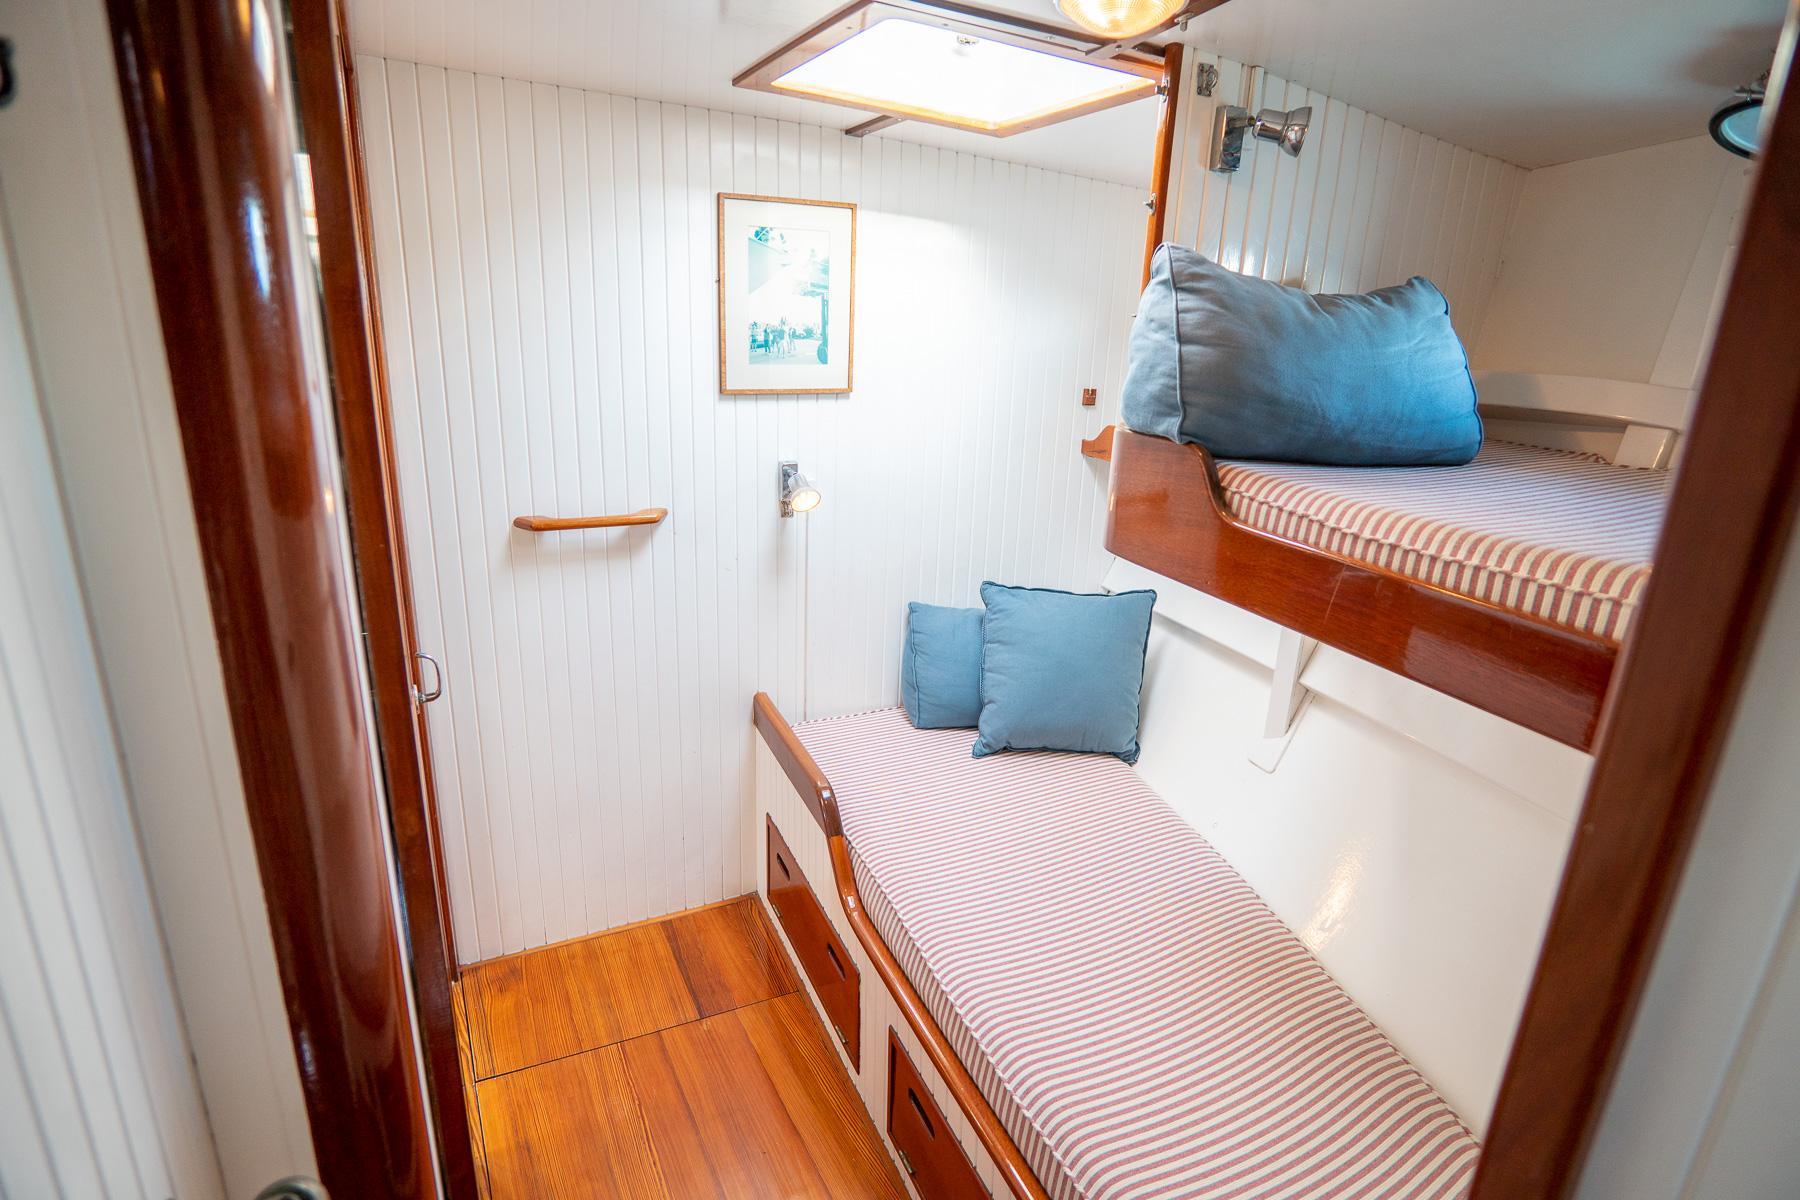 Starboard Guest Stateroom